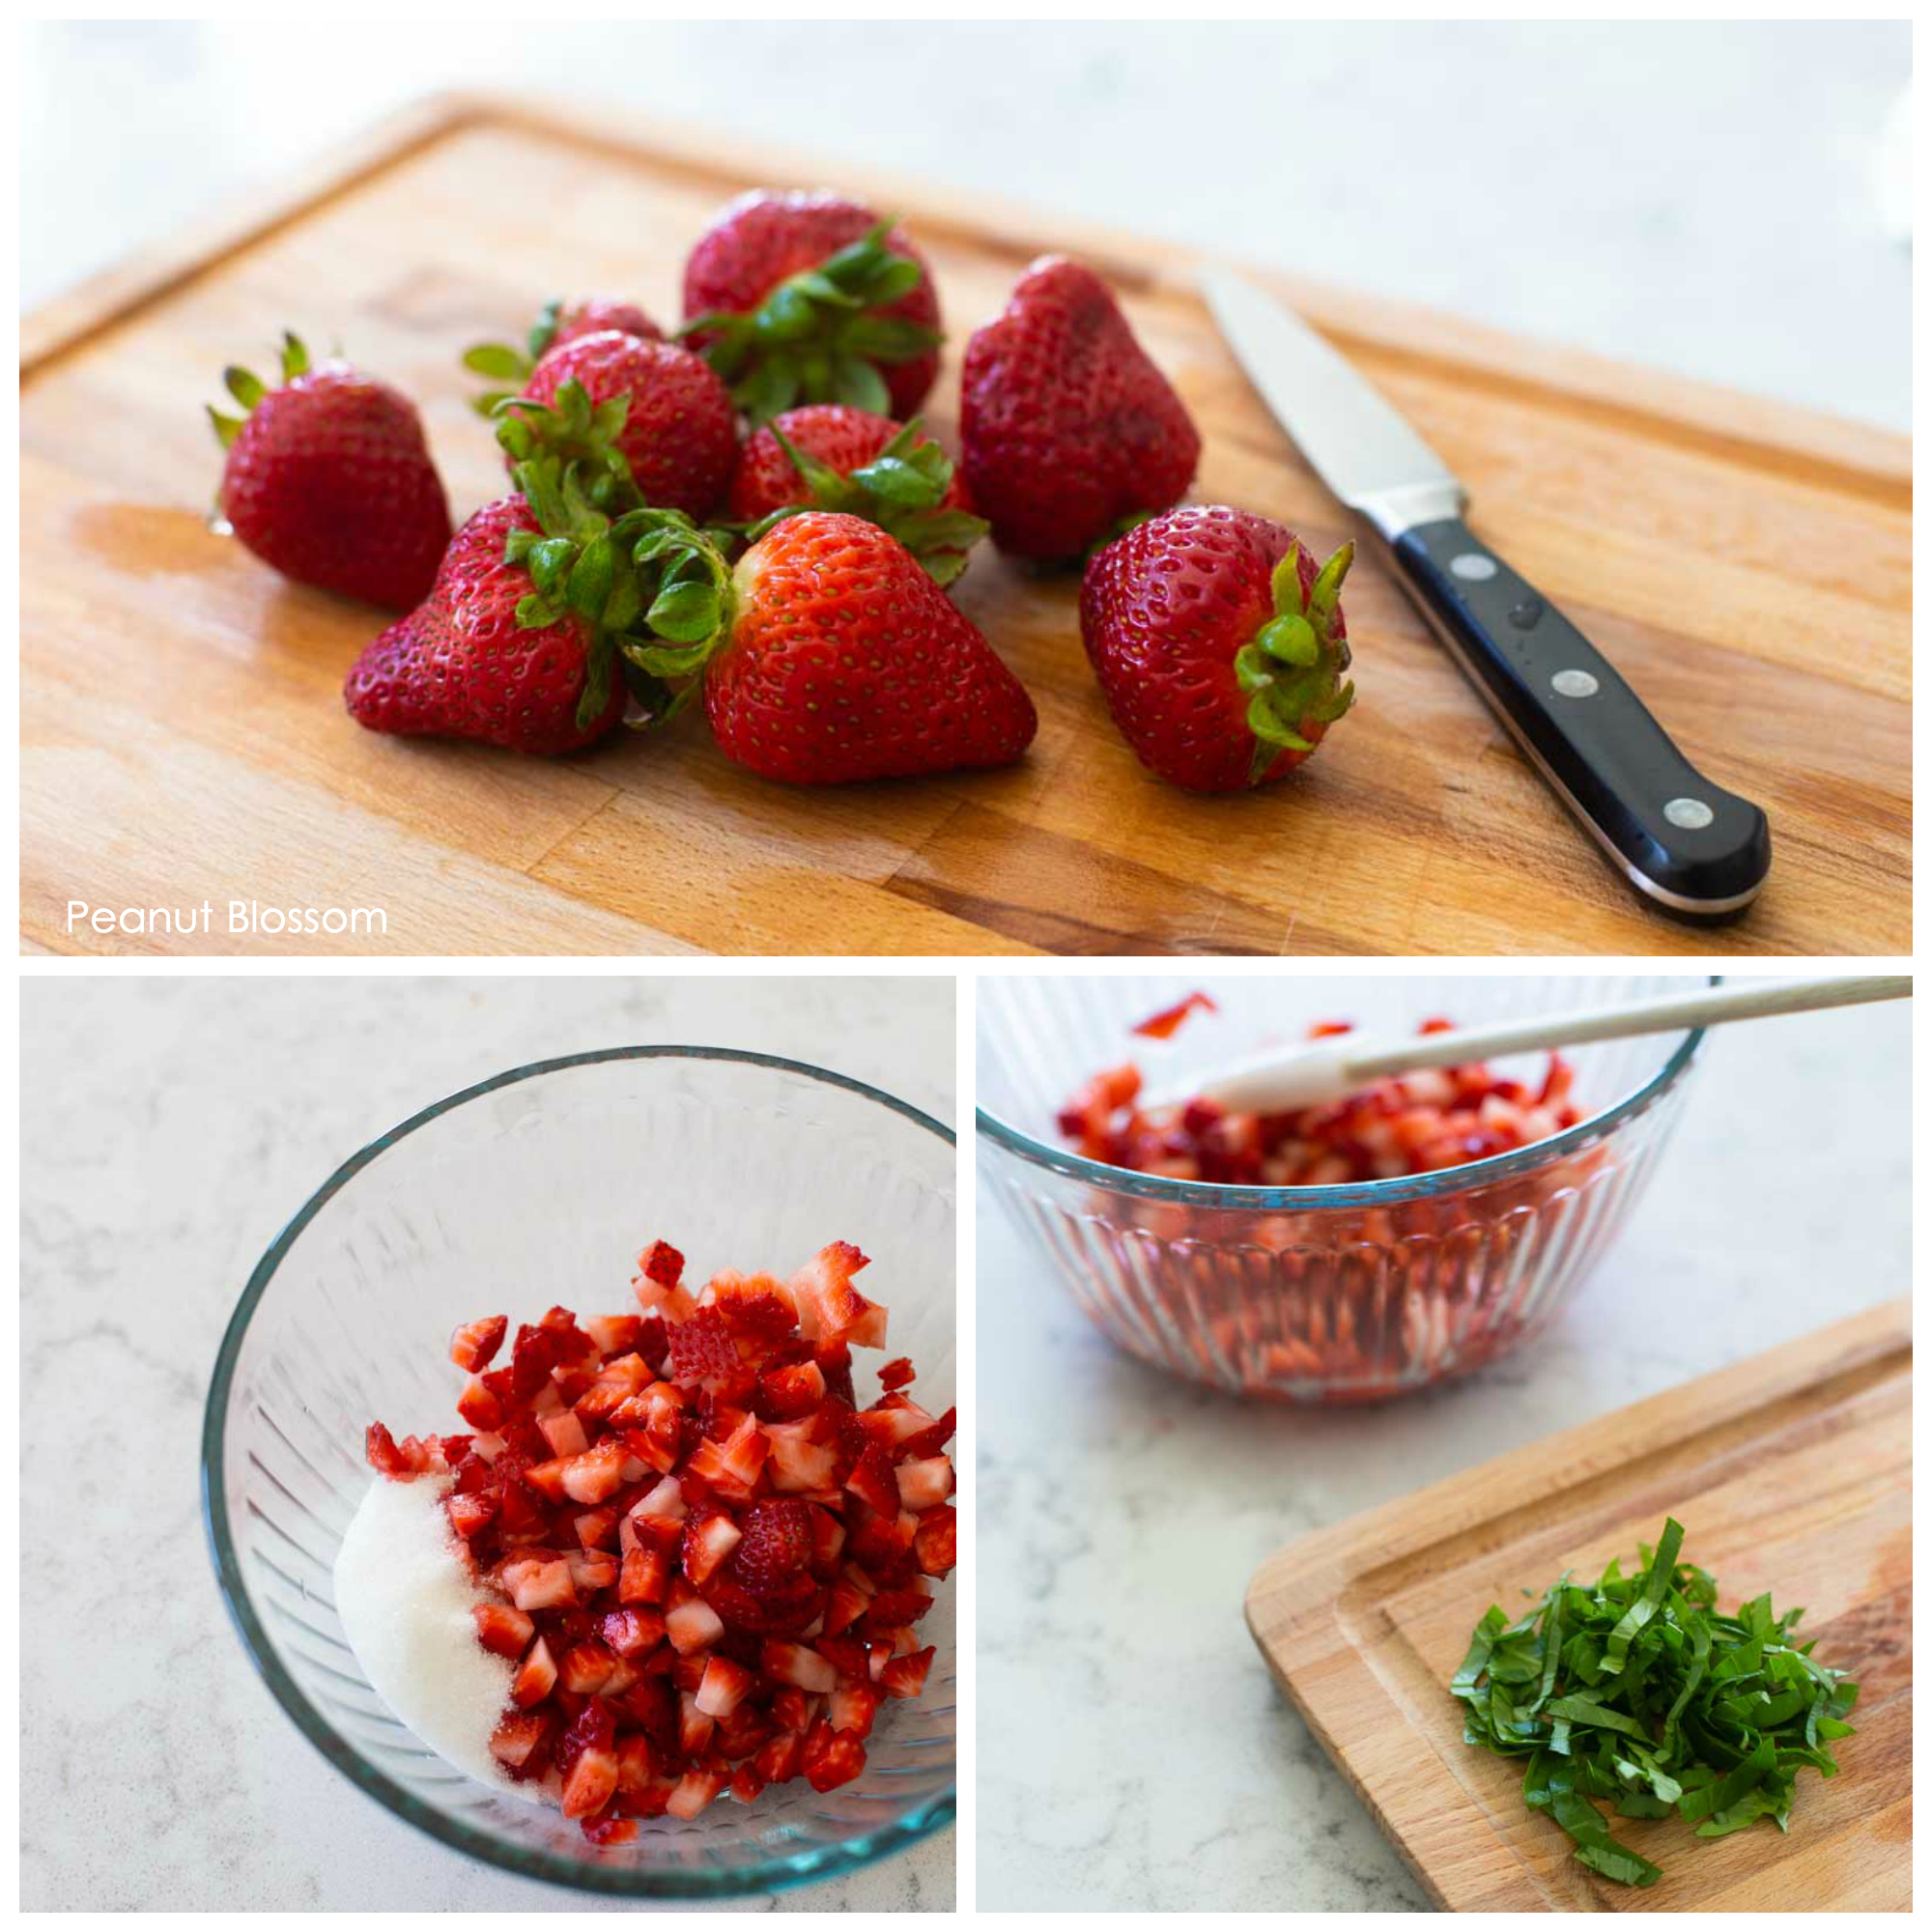 The photo collage shows fresh strawberries being diced and tossed with sugar next to a photo of the chopped fresh basil on a cutting board.